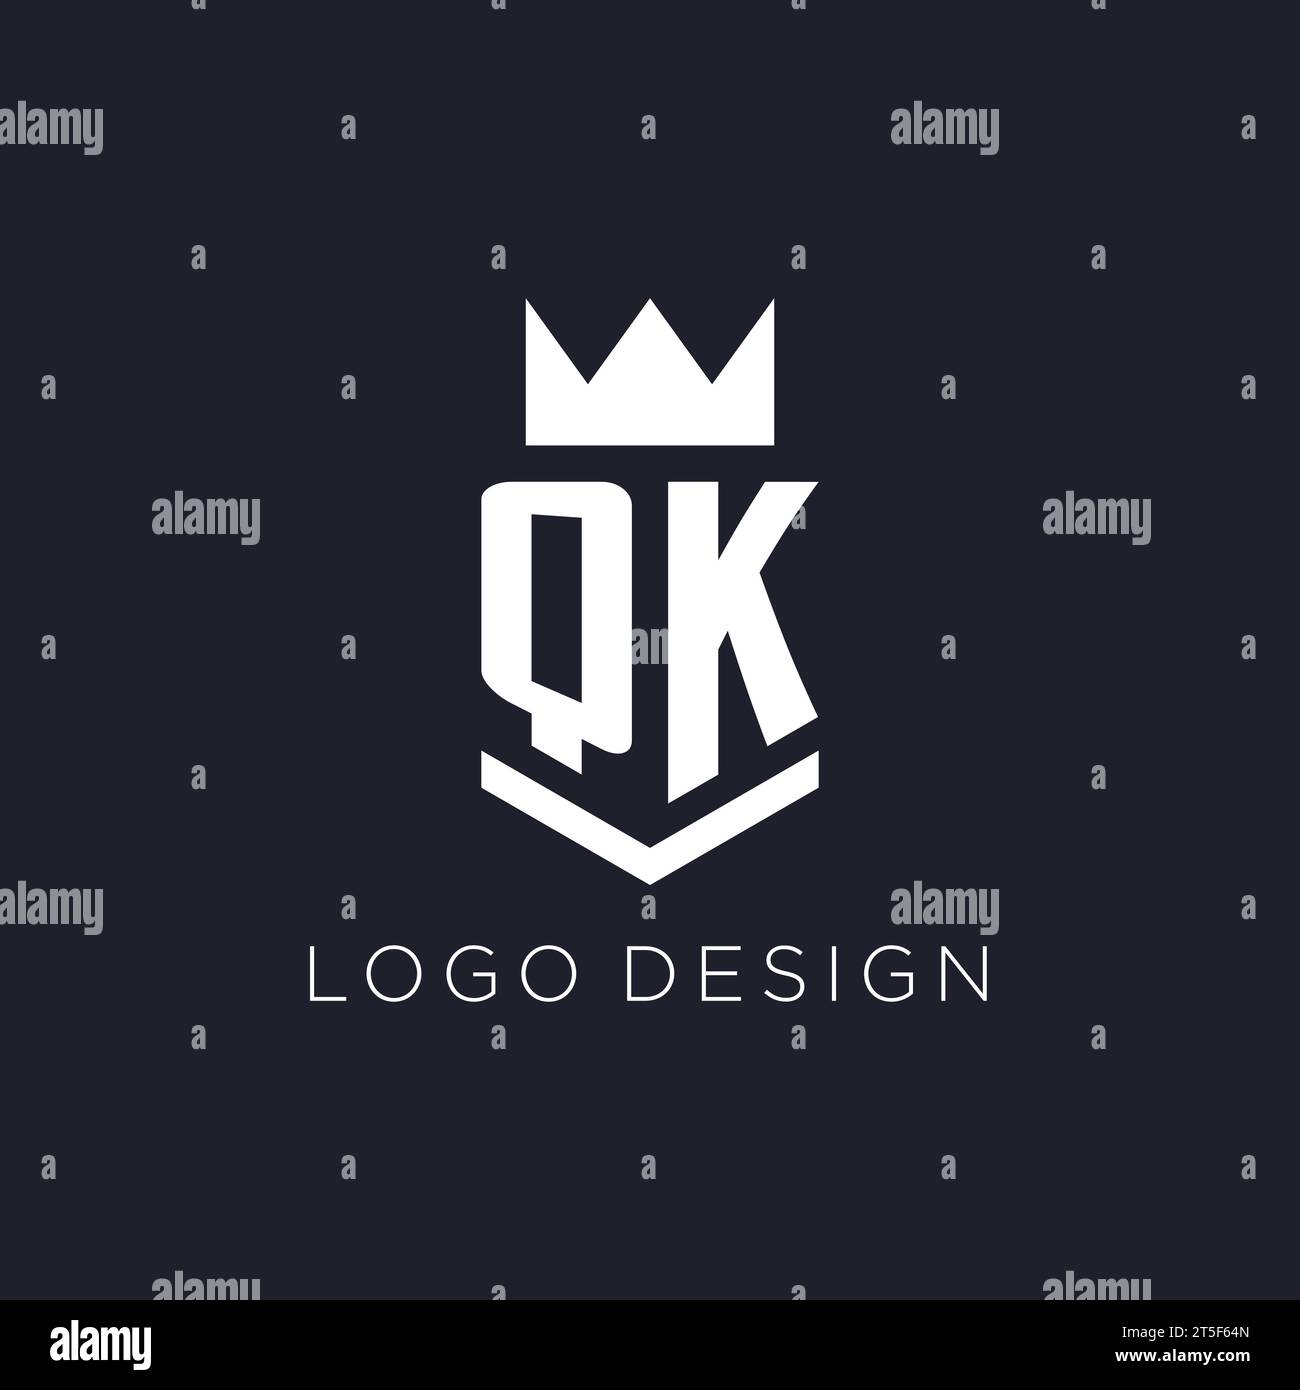 QK logo with shield and crown, initial monogram logo design ideas Stock Vector